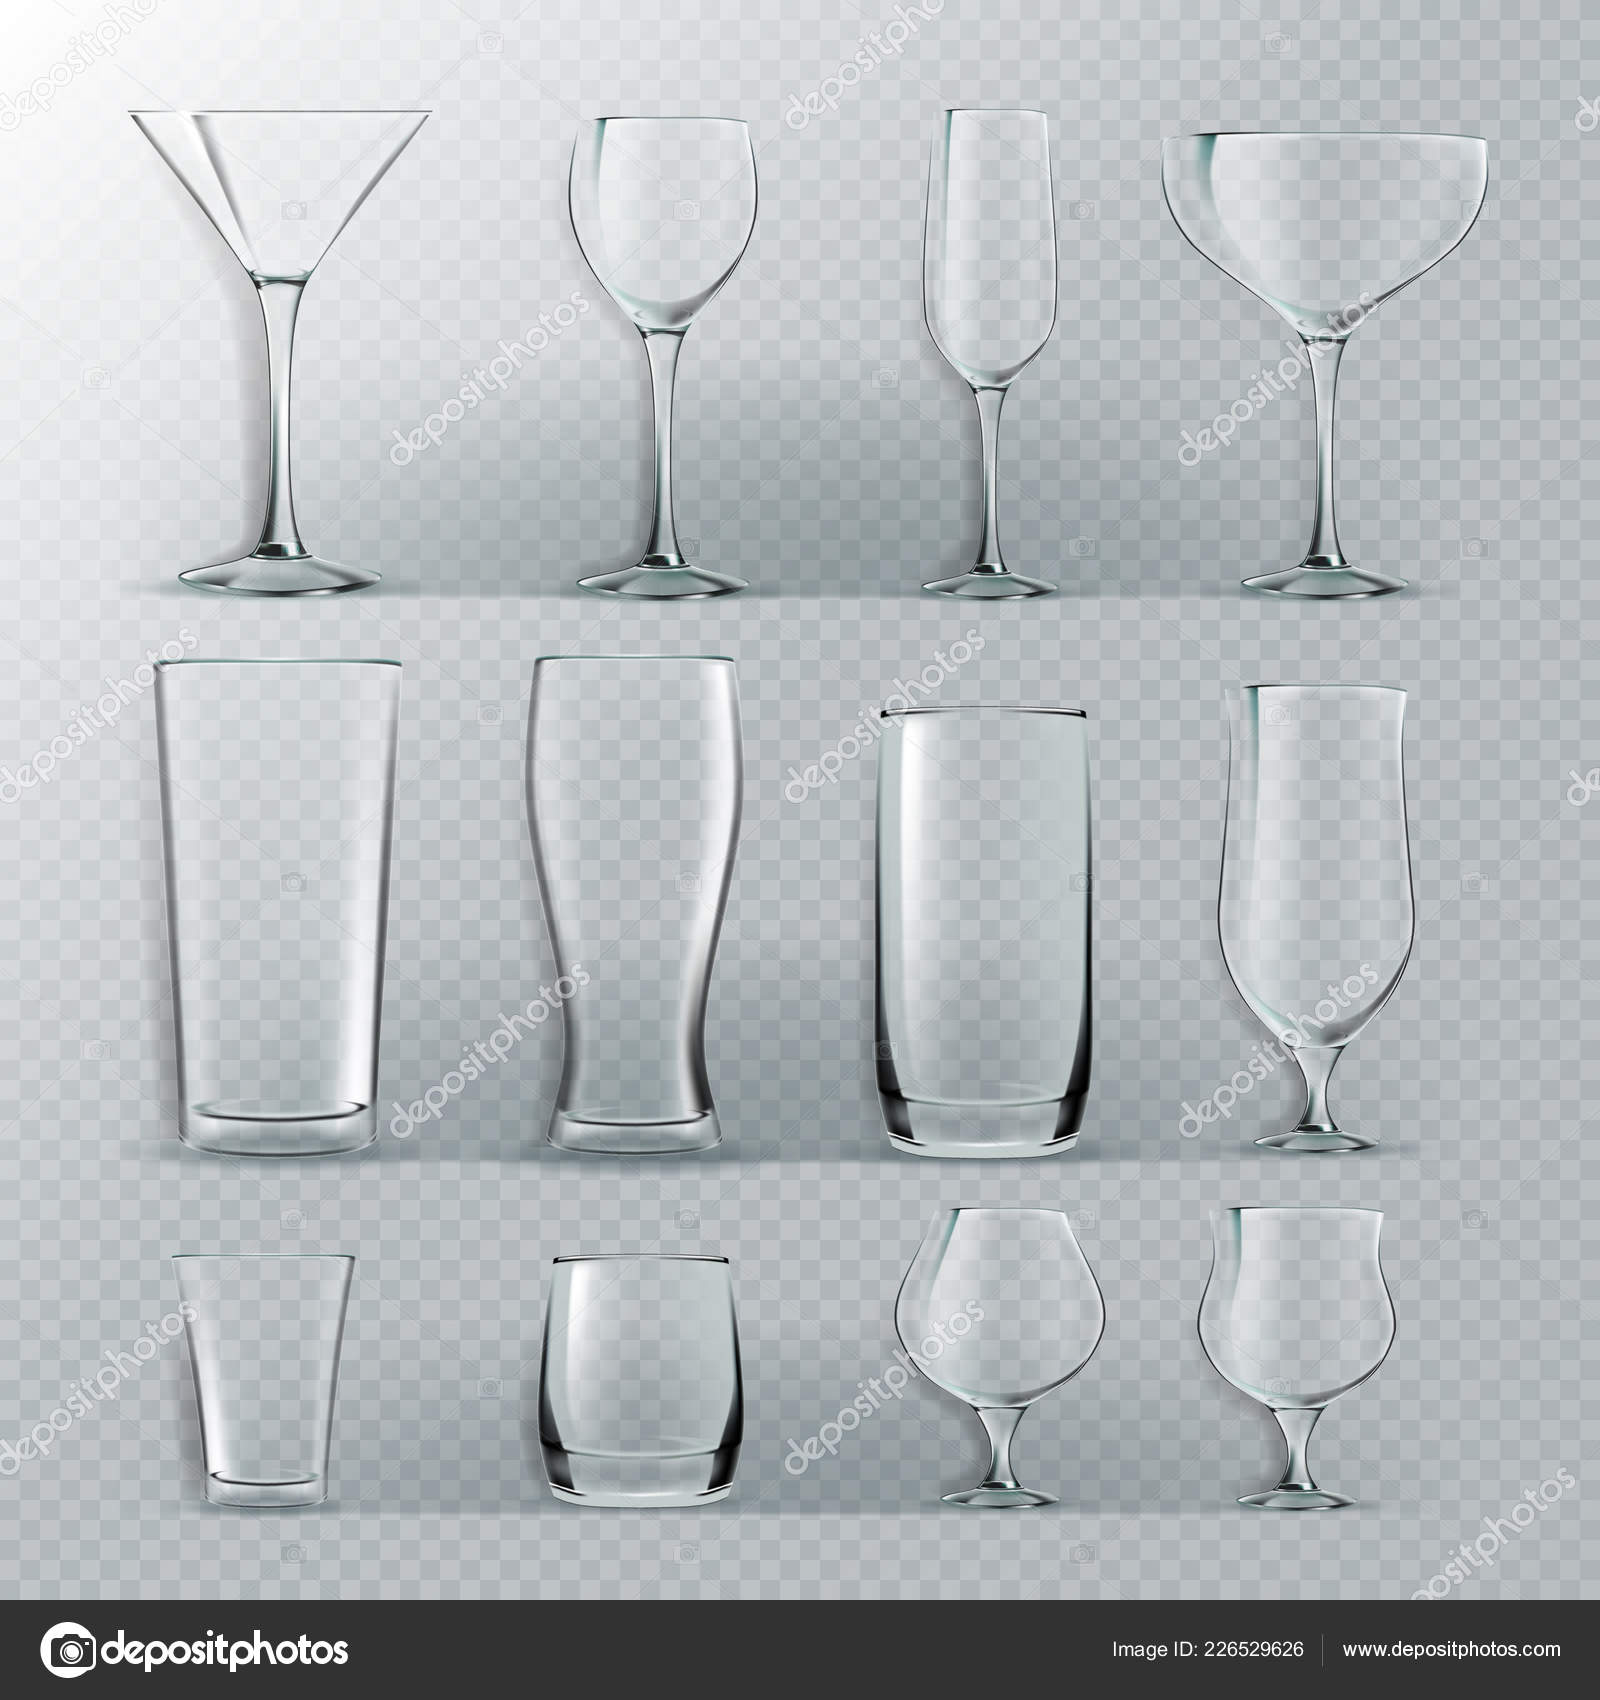 Set of Drinking Glass for Alcohol Beverage, Vectors